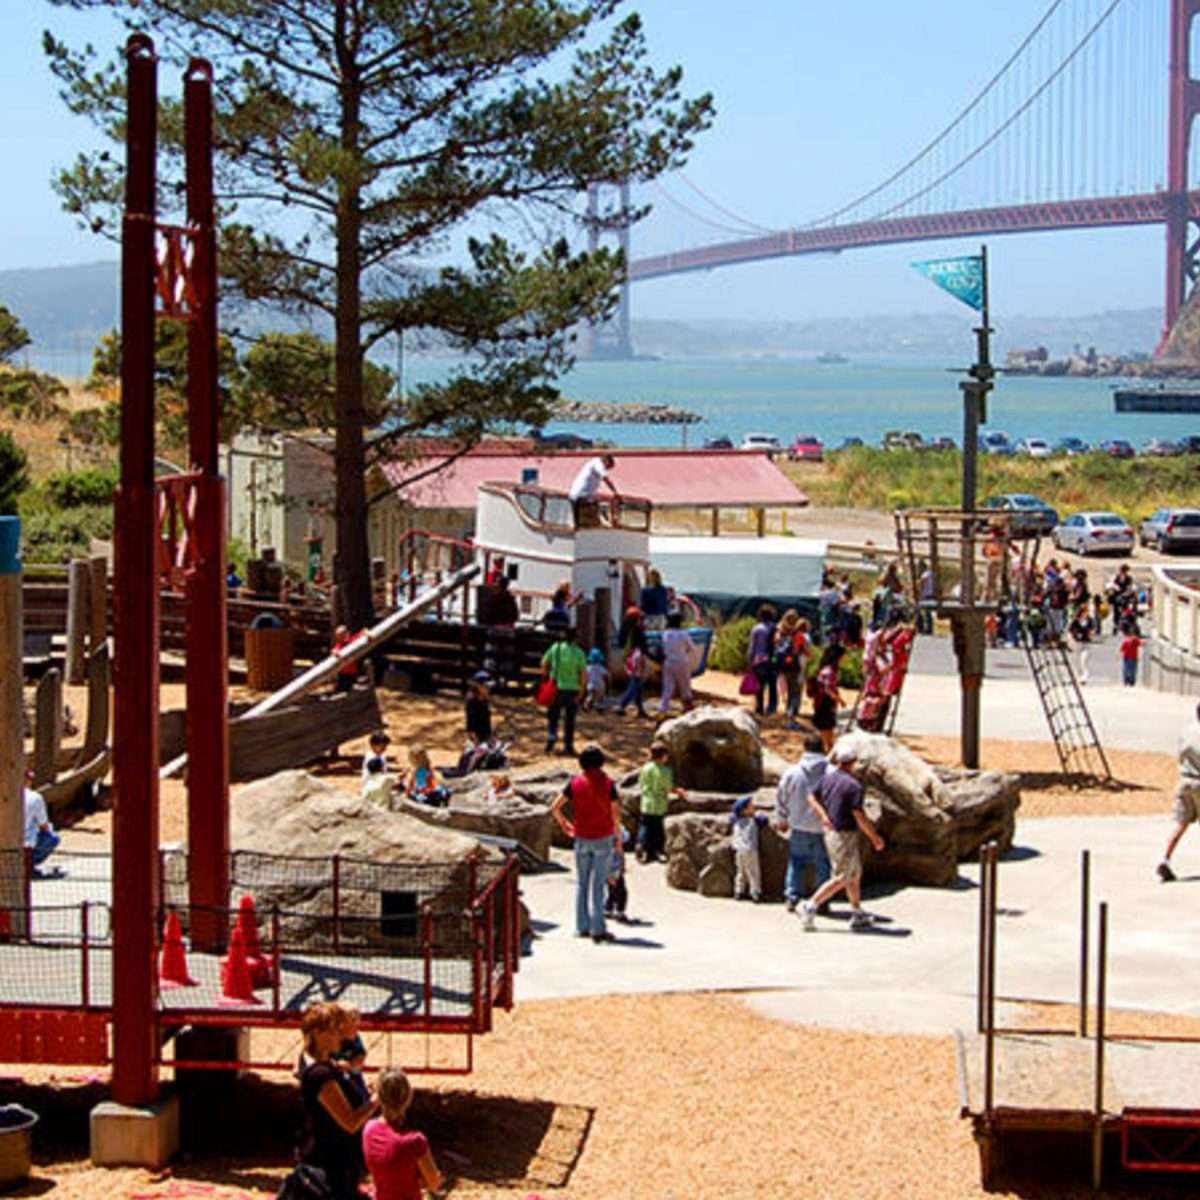 Bay Area Discovery Museum in Sausalito